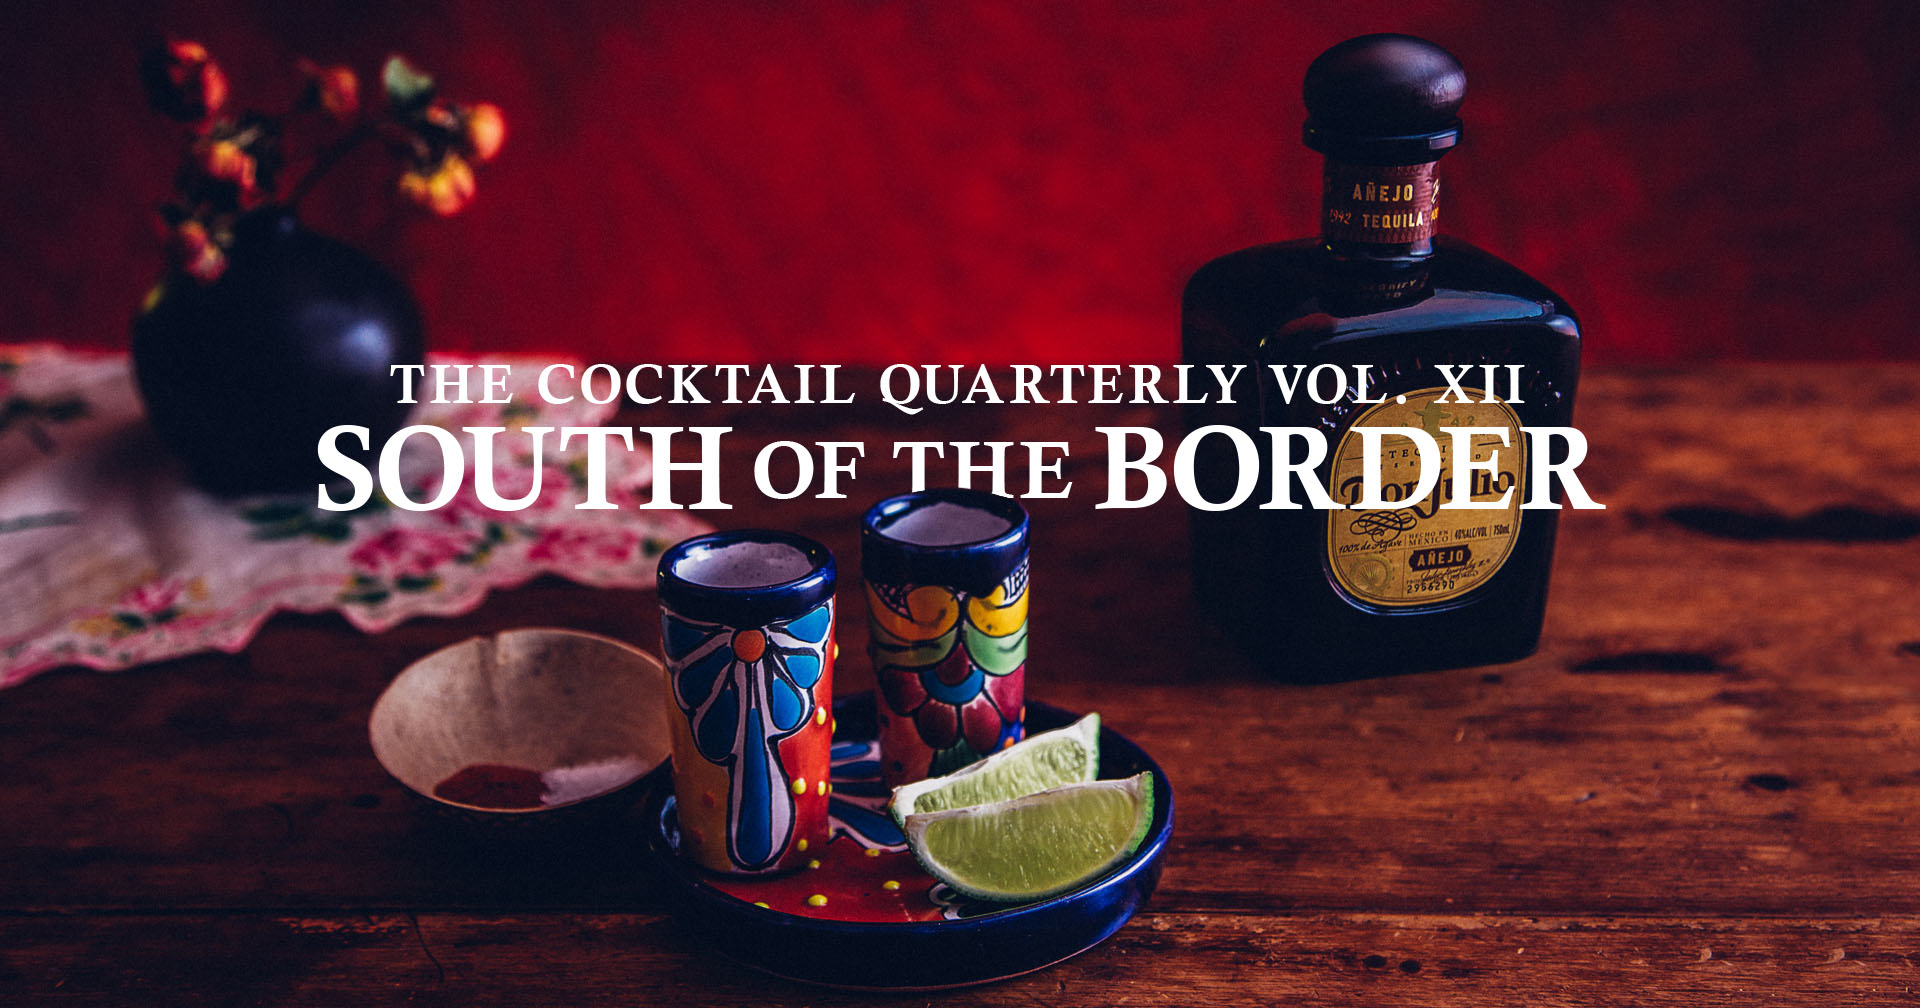 The Cocktail Quarterly, Vol. XII